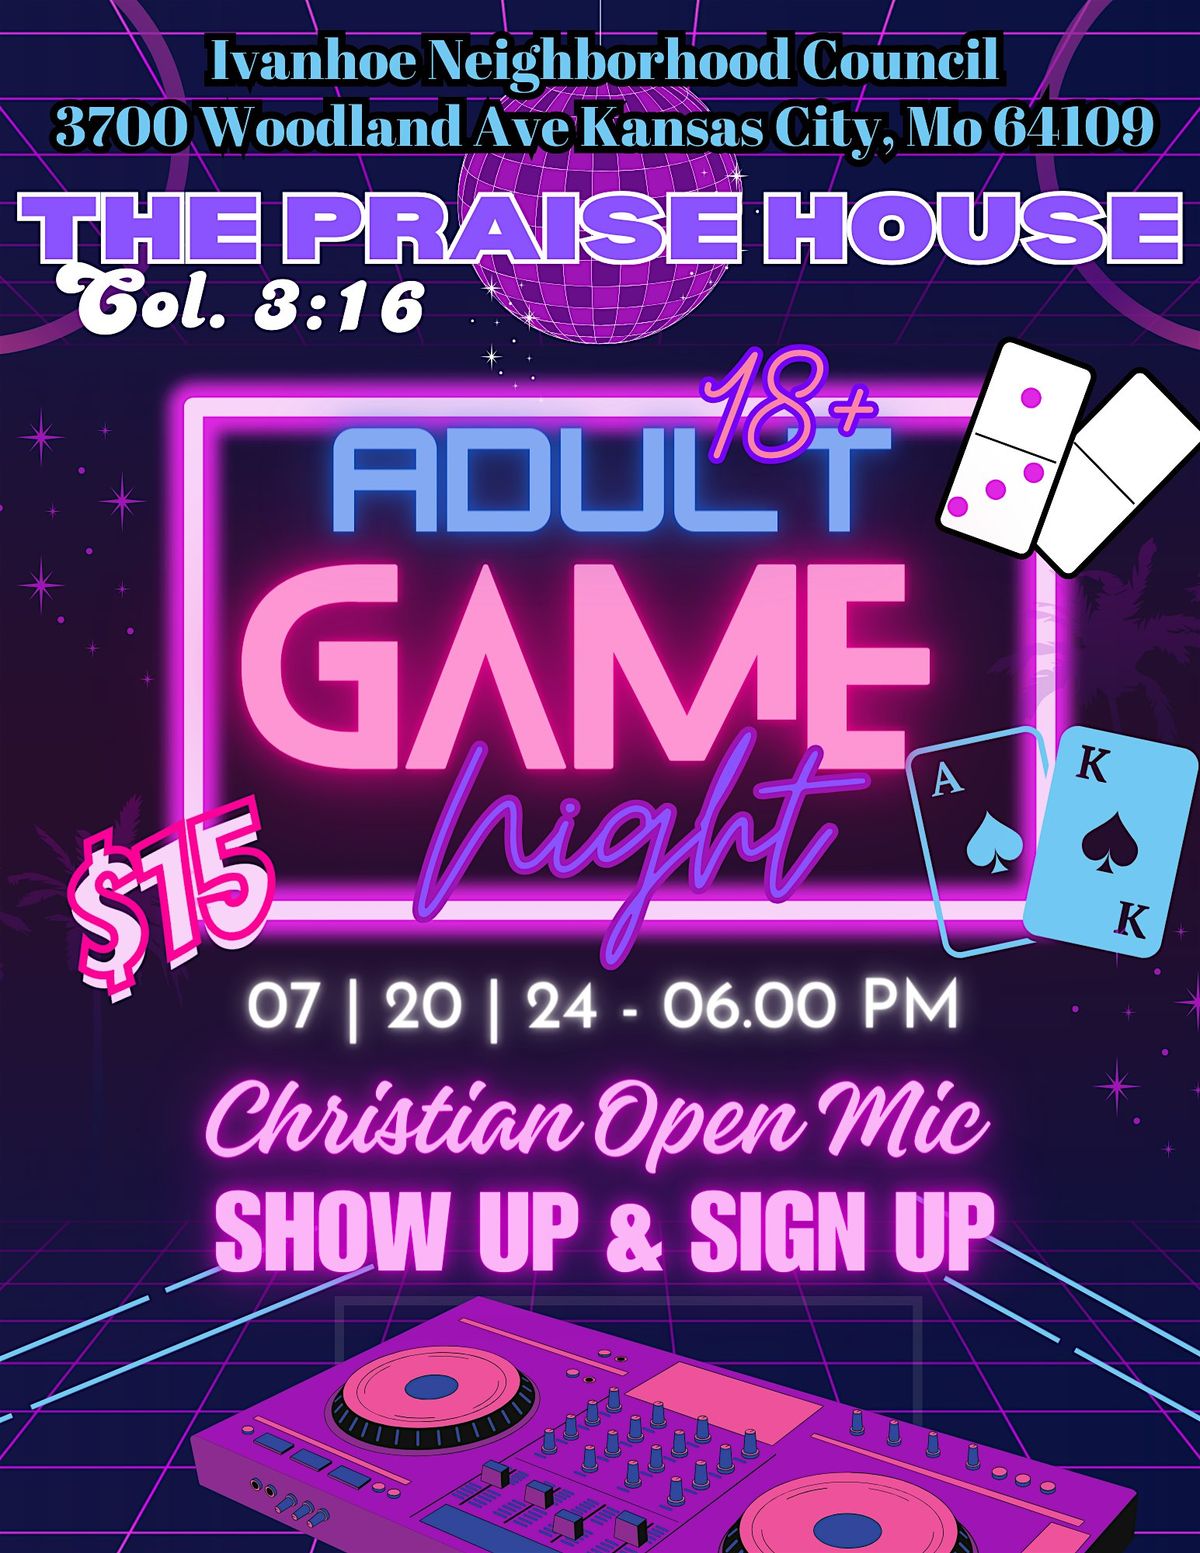 Adult Game Night & Christian Open Mic